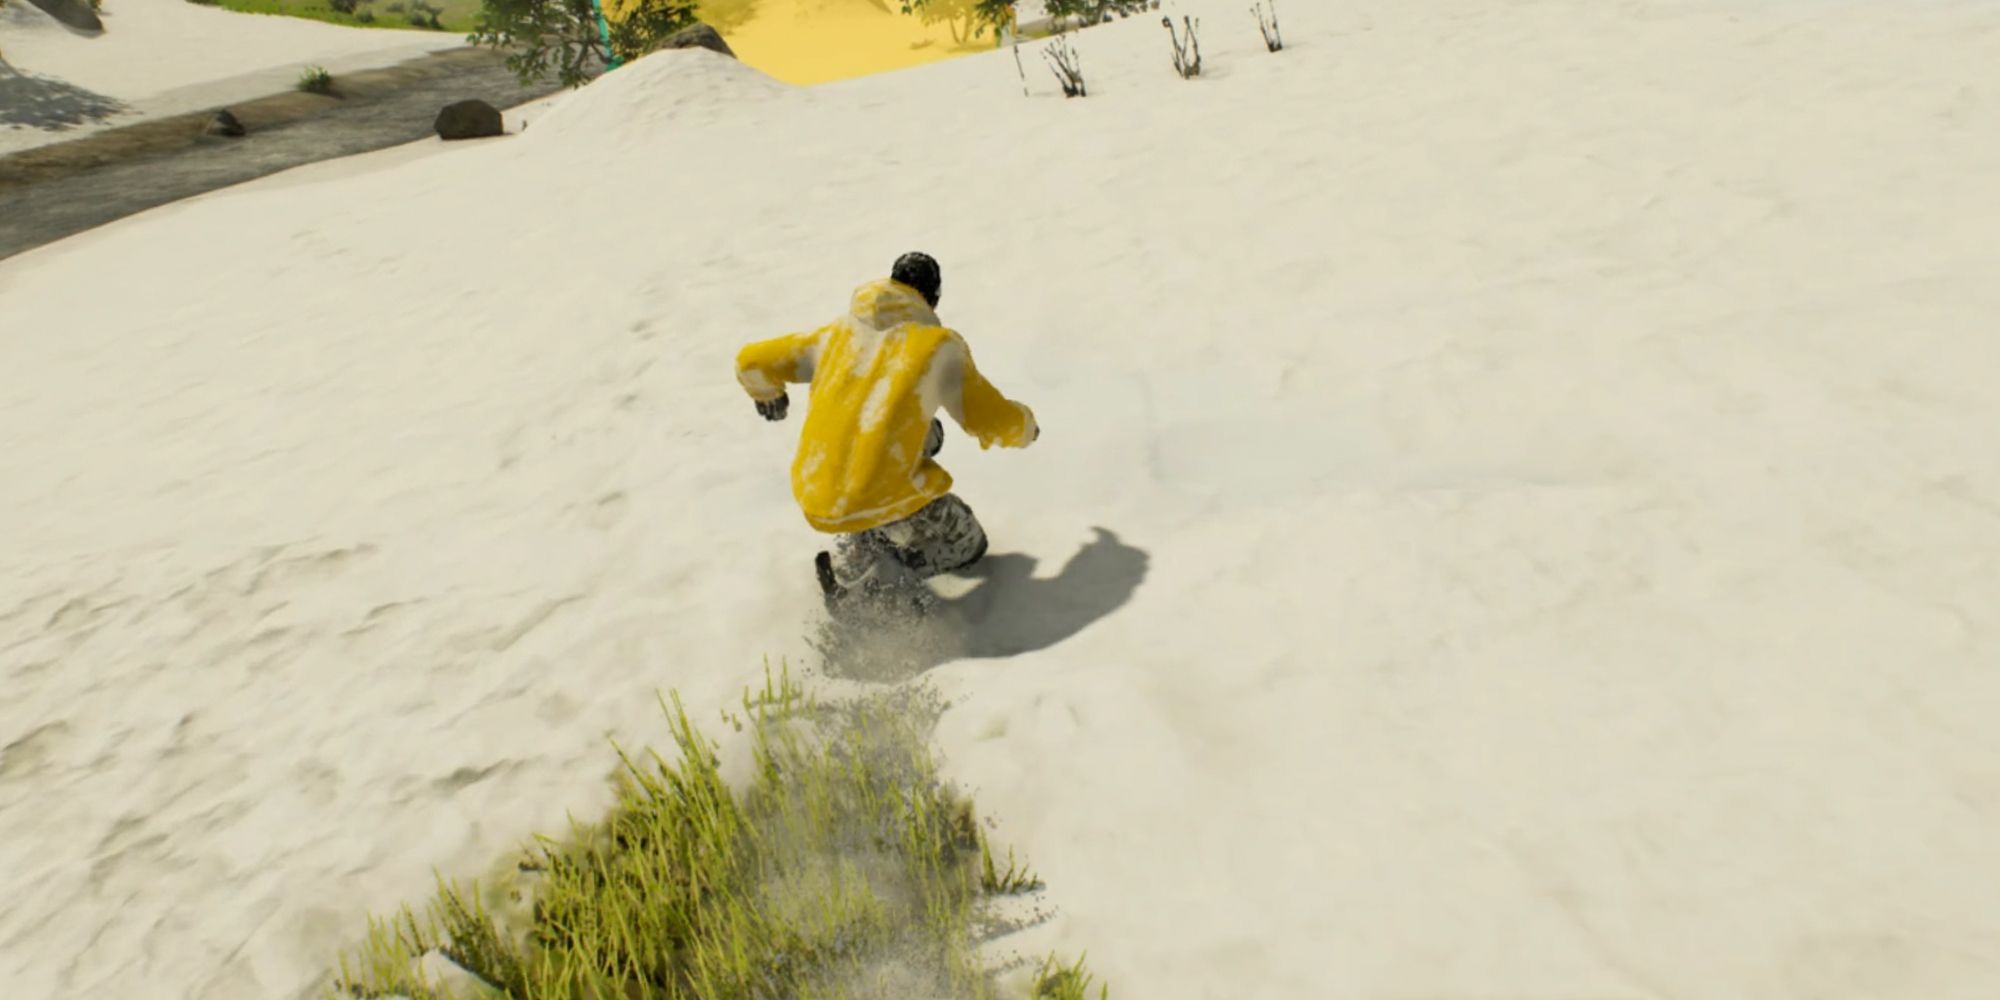 Riders Republic. Snowboard riding in snow with checkpoint ahead. Wearing yellow jacket.